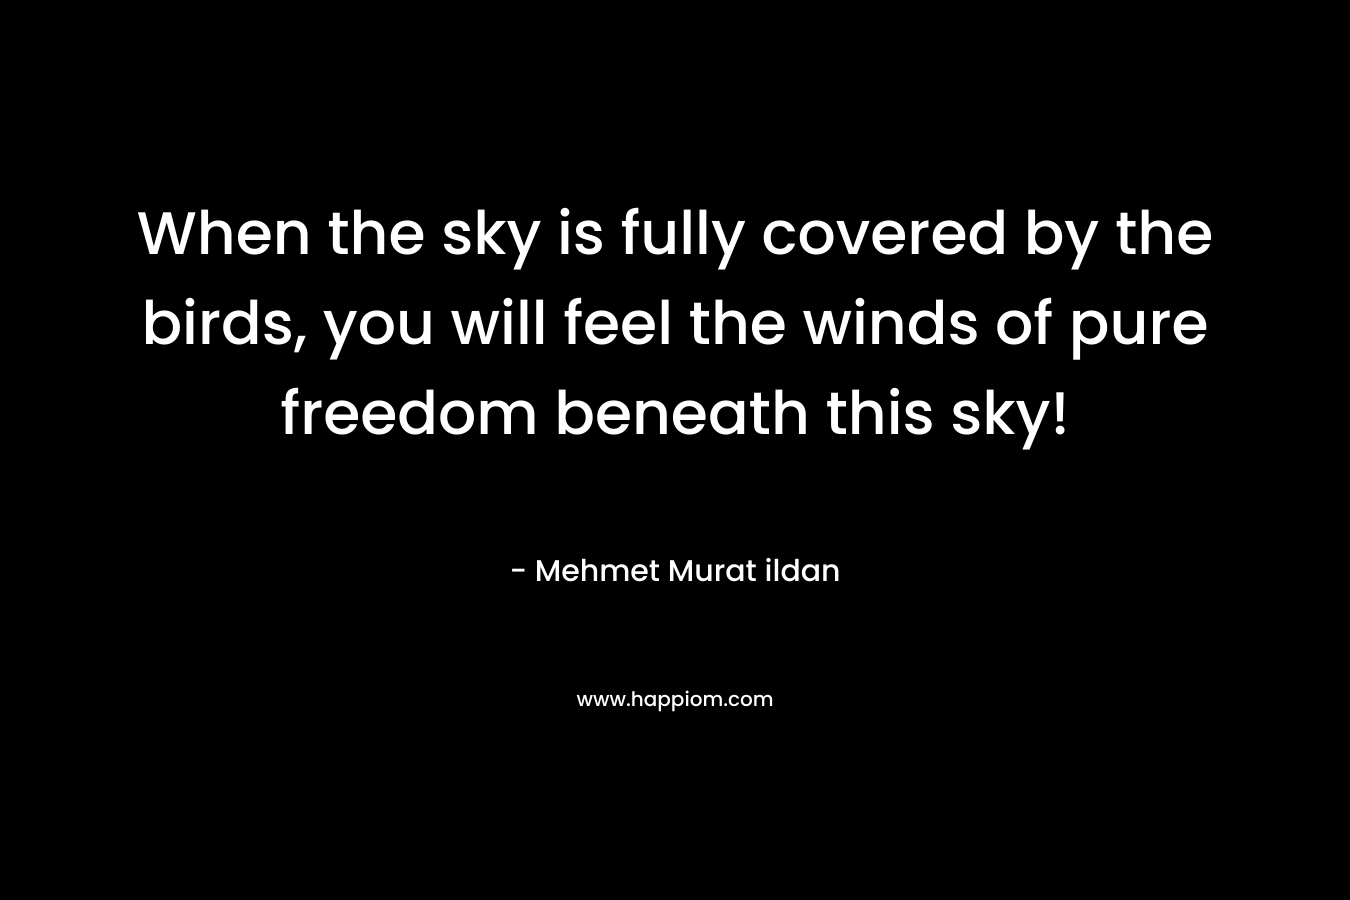 When the sky is fully covered by the birds, you will feel the winds of pure freedom beneath this sky!